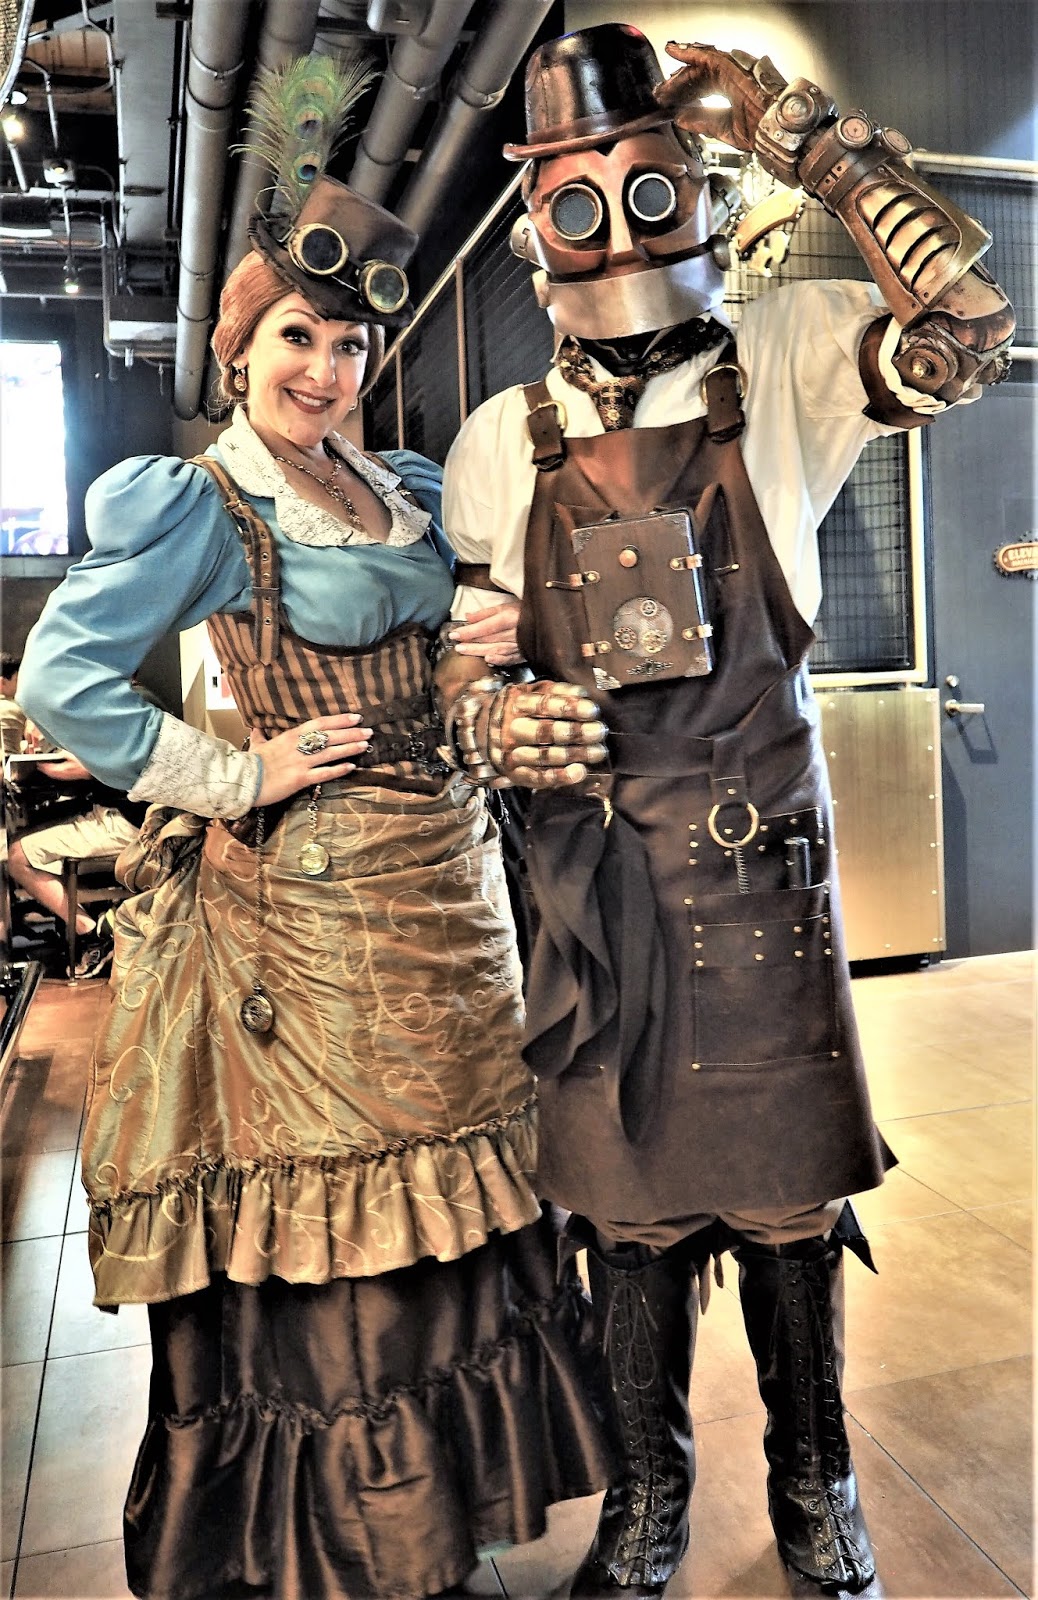 For the Love of Food! : The Toothsome Chocolate Emporium & Savory ...